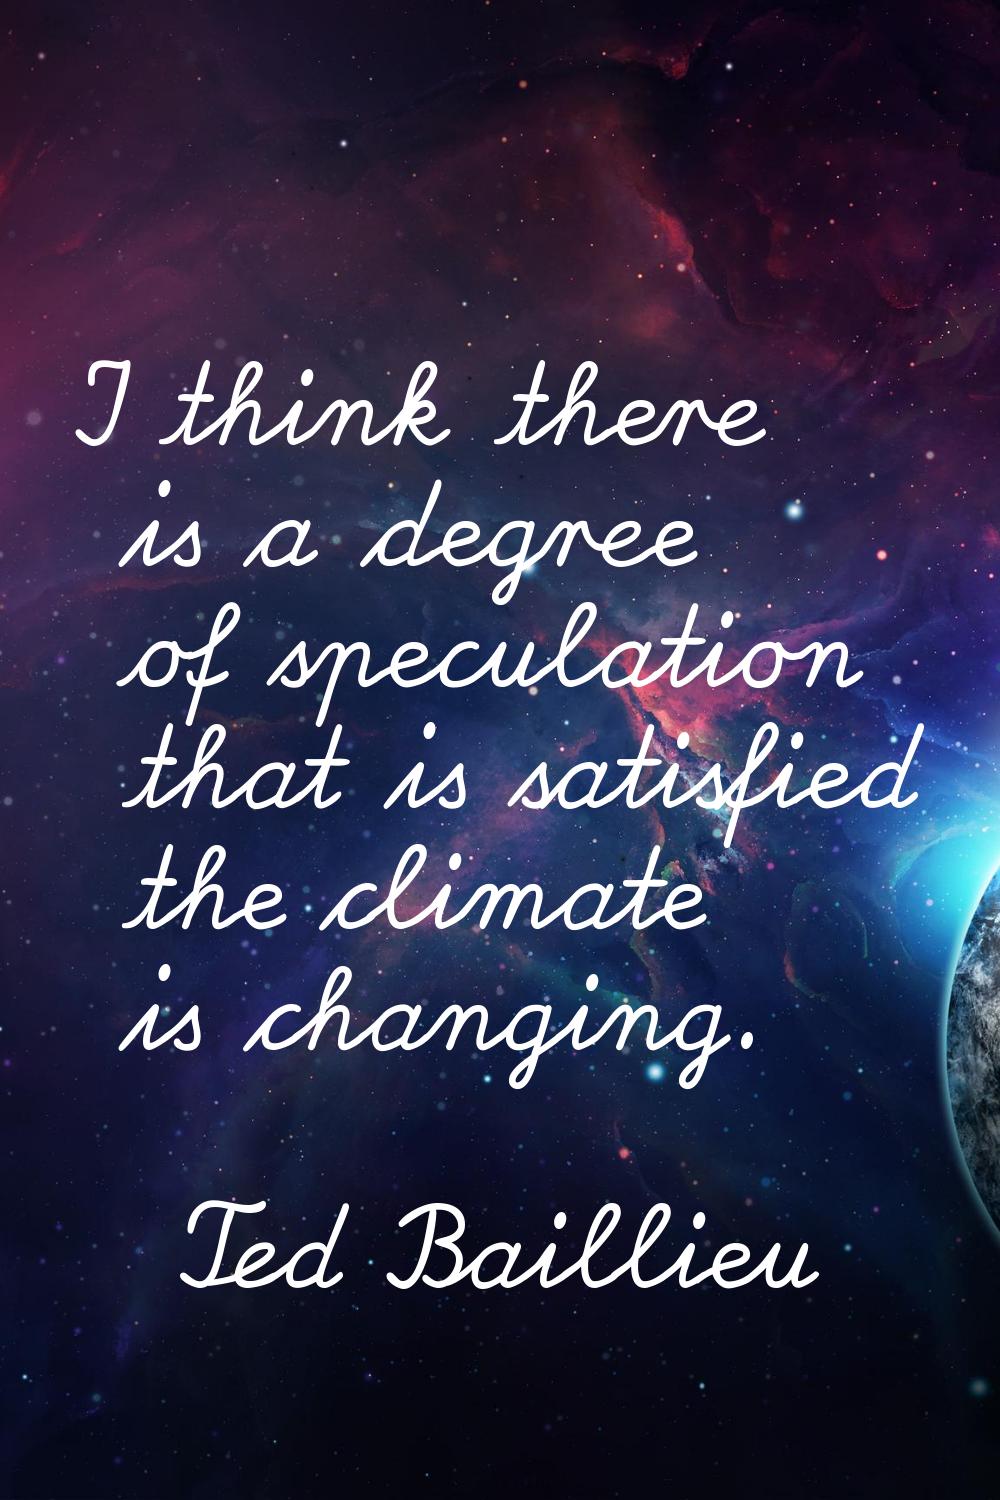 I think there is a degree of speculation that is satisfied the climate is changing.